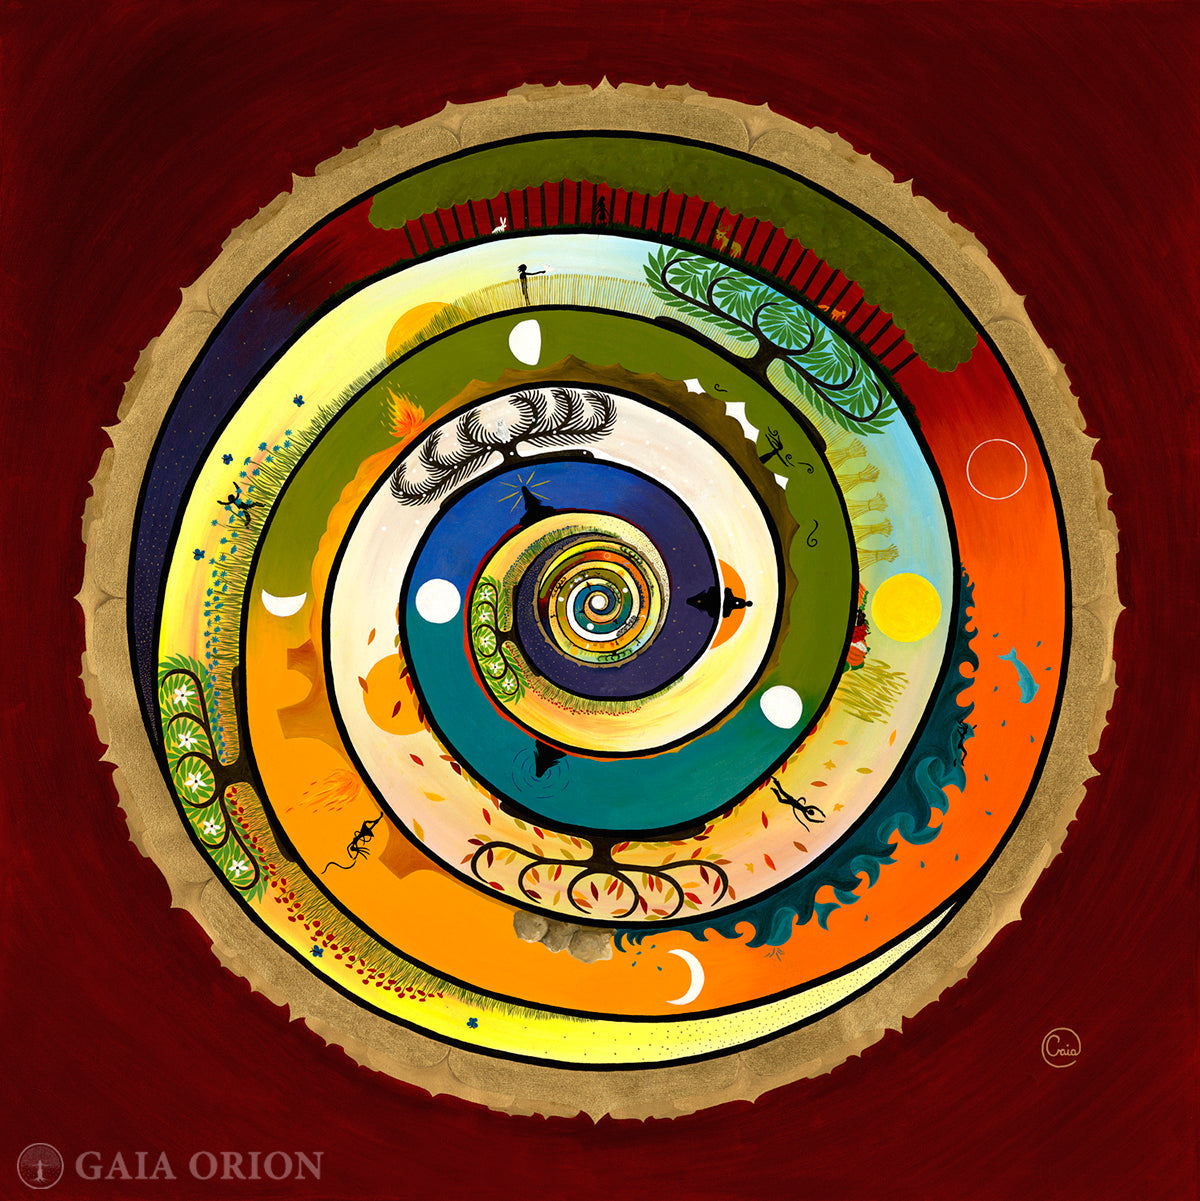 Her Journey Prints - Mandala and Spiral Art by Gaia Orion